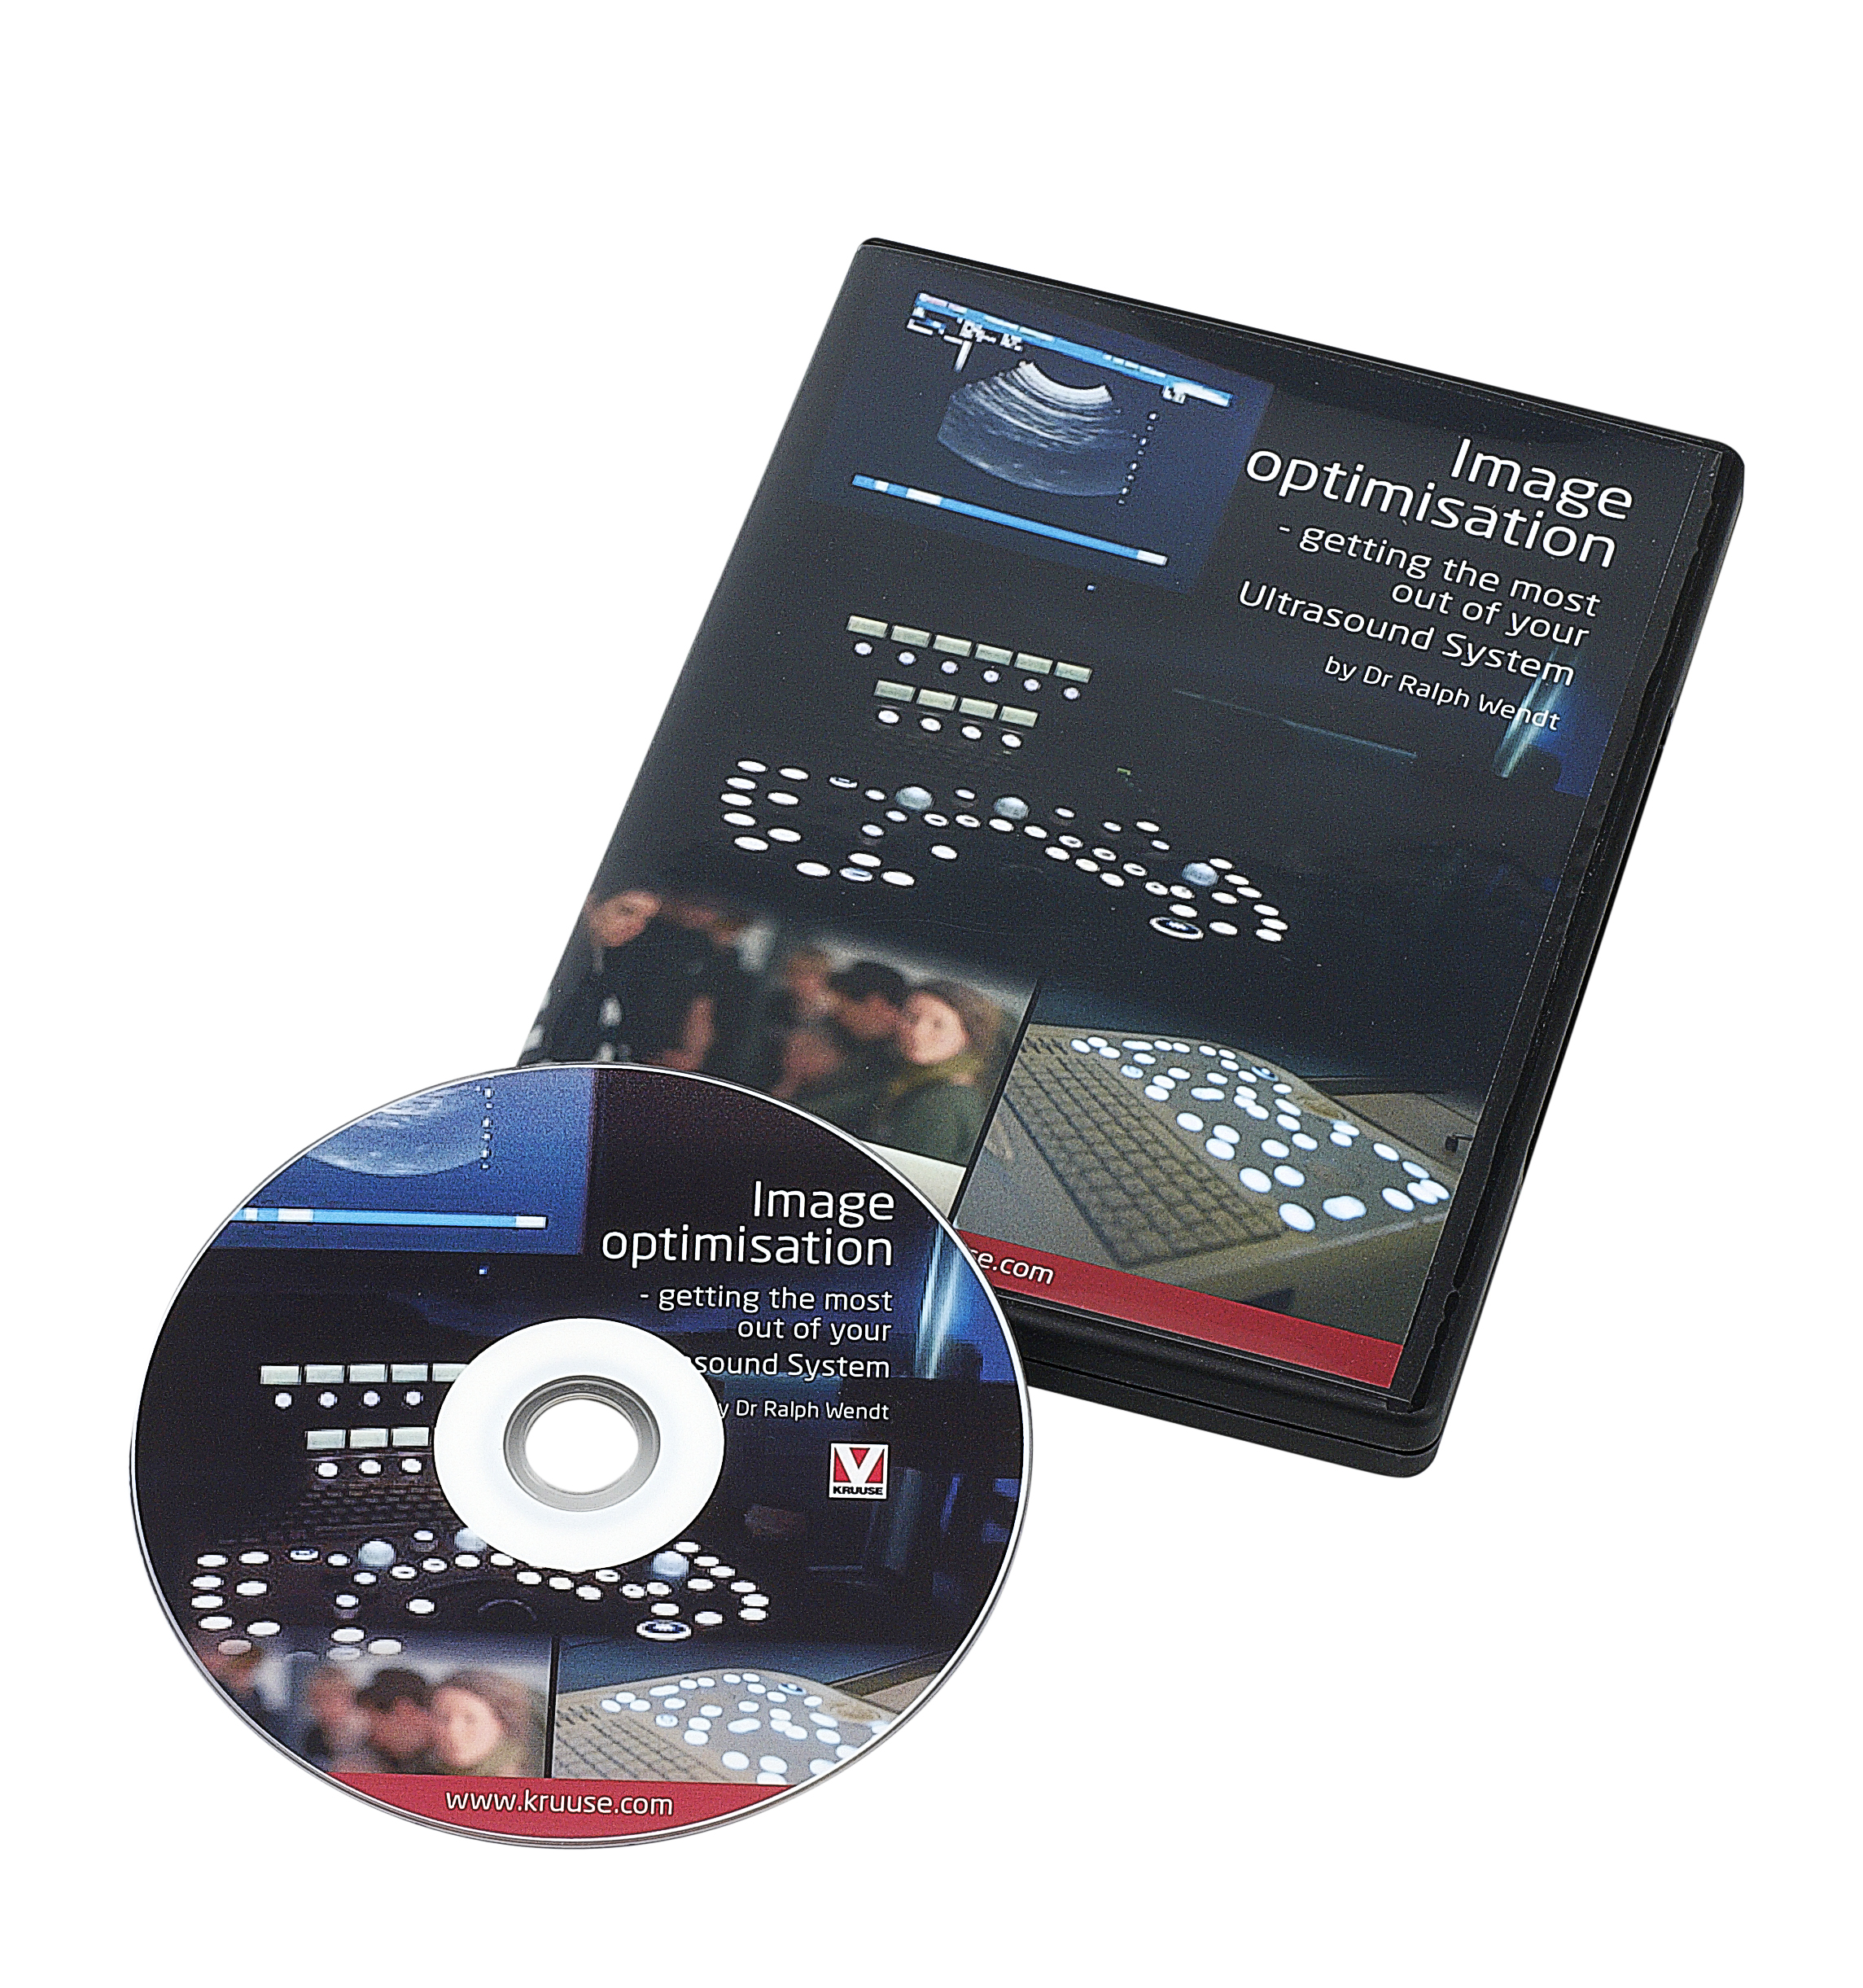 DVD: Image optimasation by Dr Ralph Wendt